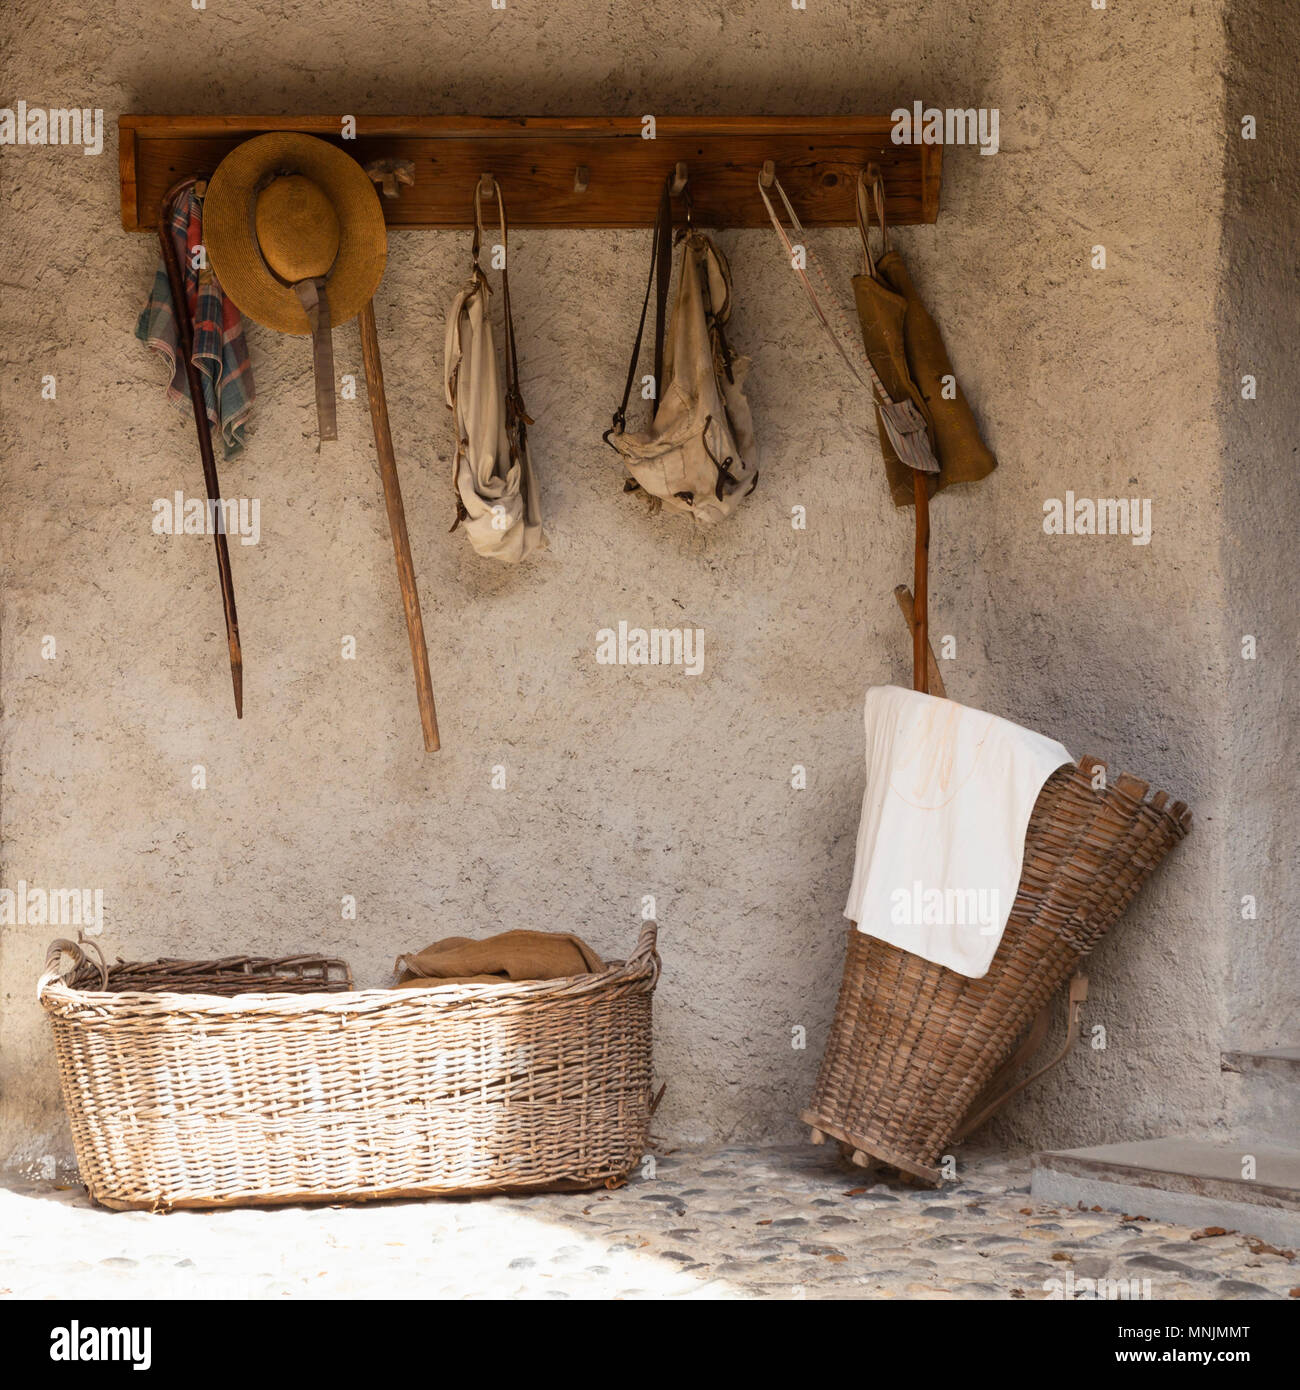 Front view of a retro style outdoor wardrobe with walking sticks, backpacks, baskets and travel equipment. Stock Photo